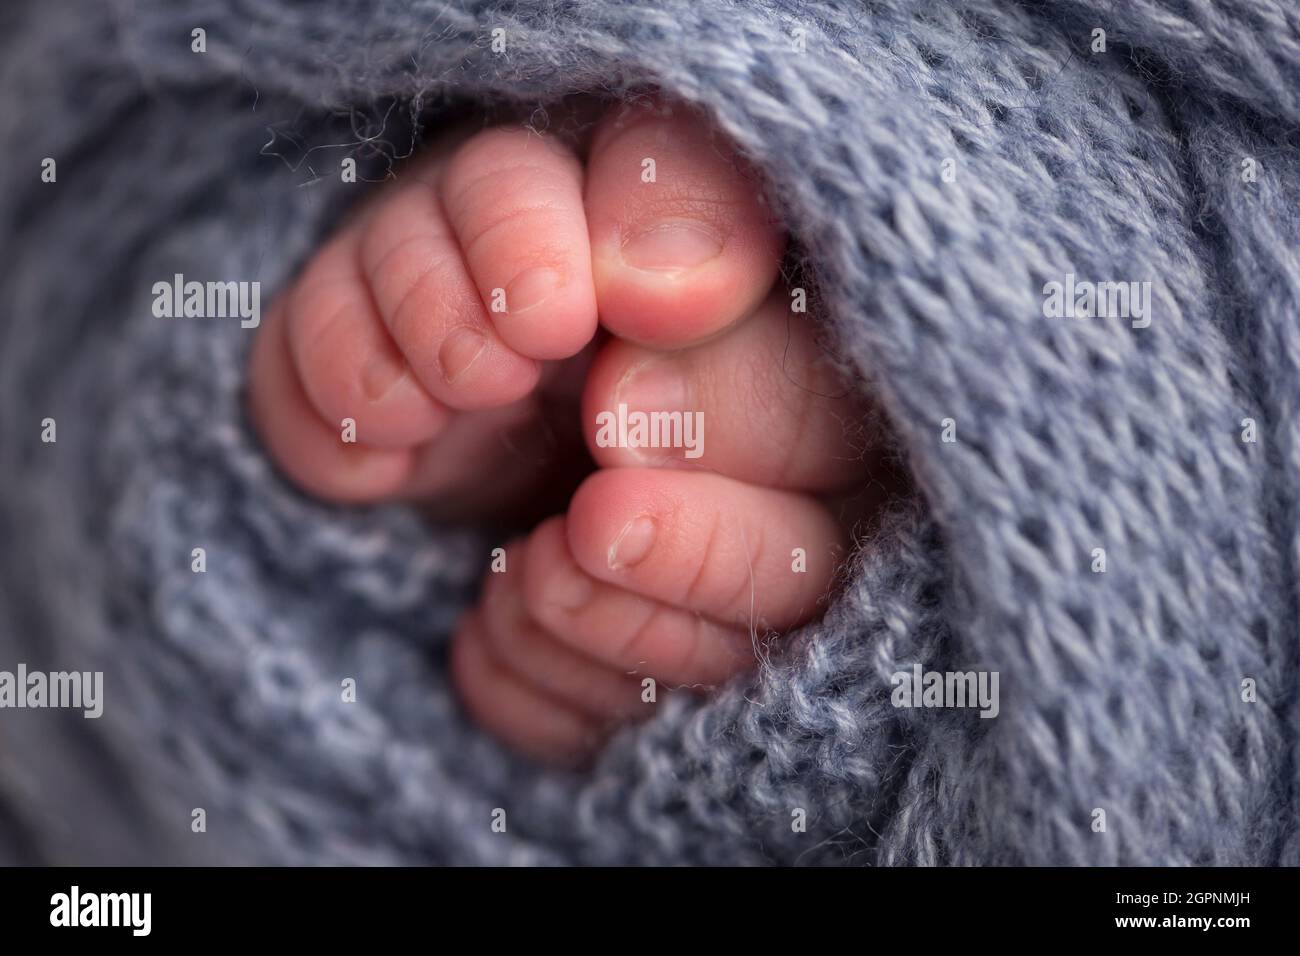 A close-up photo of a newborn's legs on a light gray plaid. Legs and toes of a newborn in a soft white blanket Stock Photo